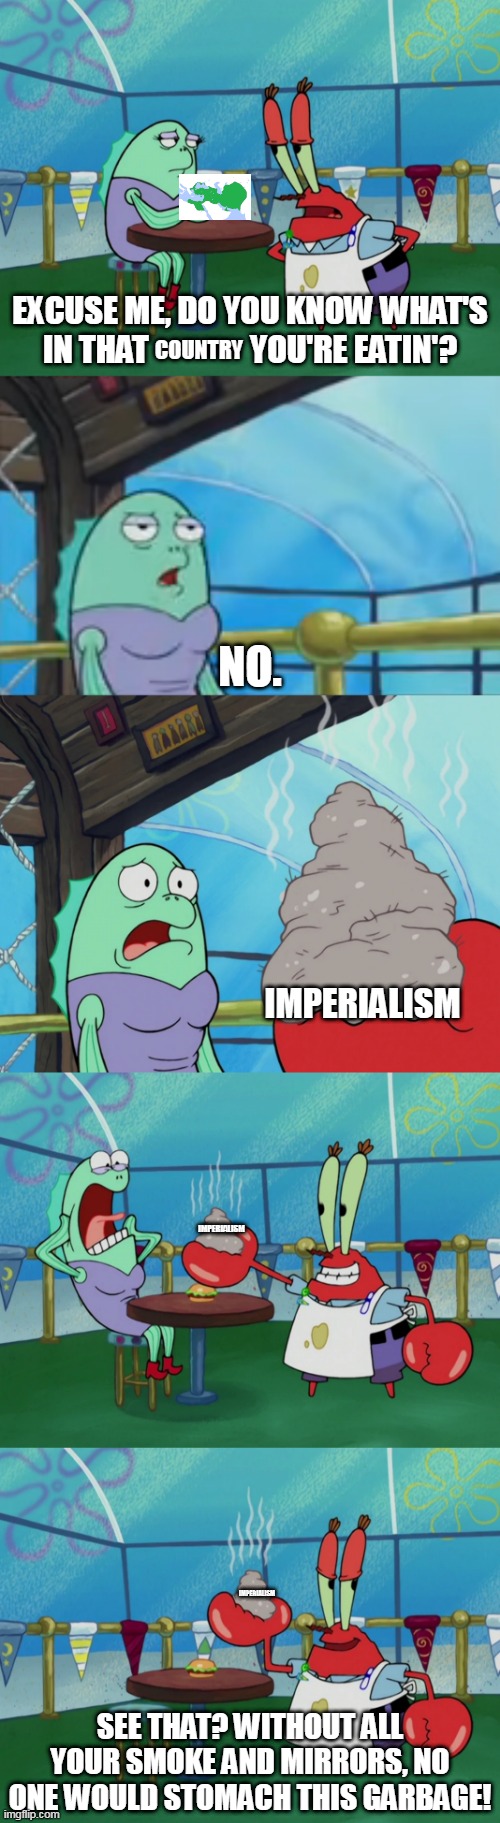 The Achaemenid Empire | COUNTRY; IMPERIALISM; IMPERIALISM; IMPERIALISM | image tagged in smoke and mirrors,achaemenid empire,persia,history,imperialism,garbage | made w/ Imgflip meme maker